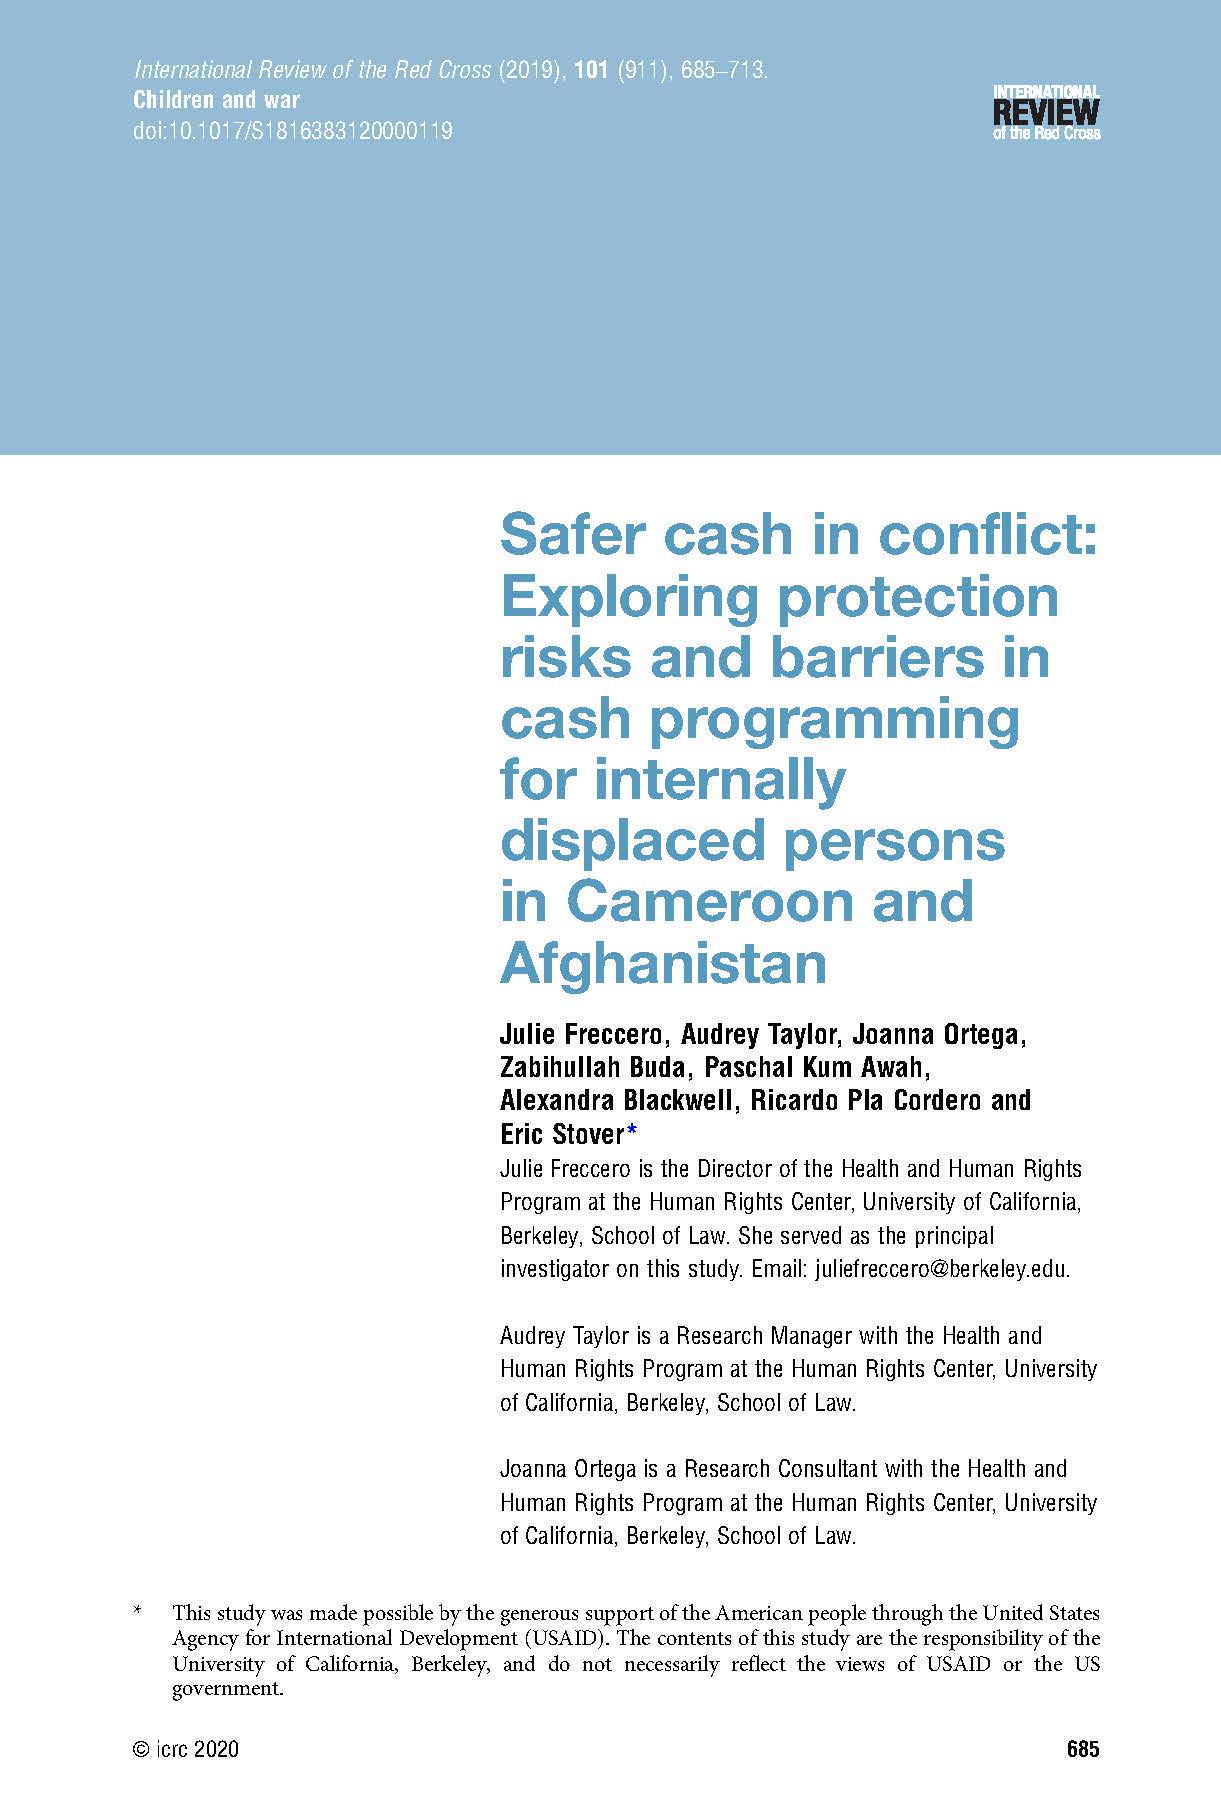 Safer cash in conflict- Exploring protection risks and barriers in cash programming for internally displaced persons in Cameroon and Afghanistan